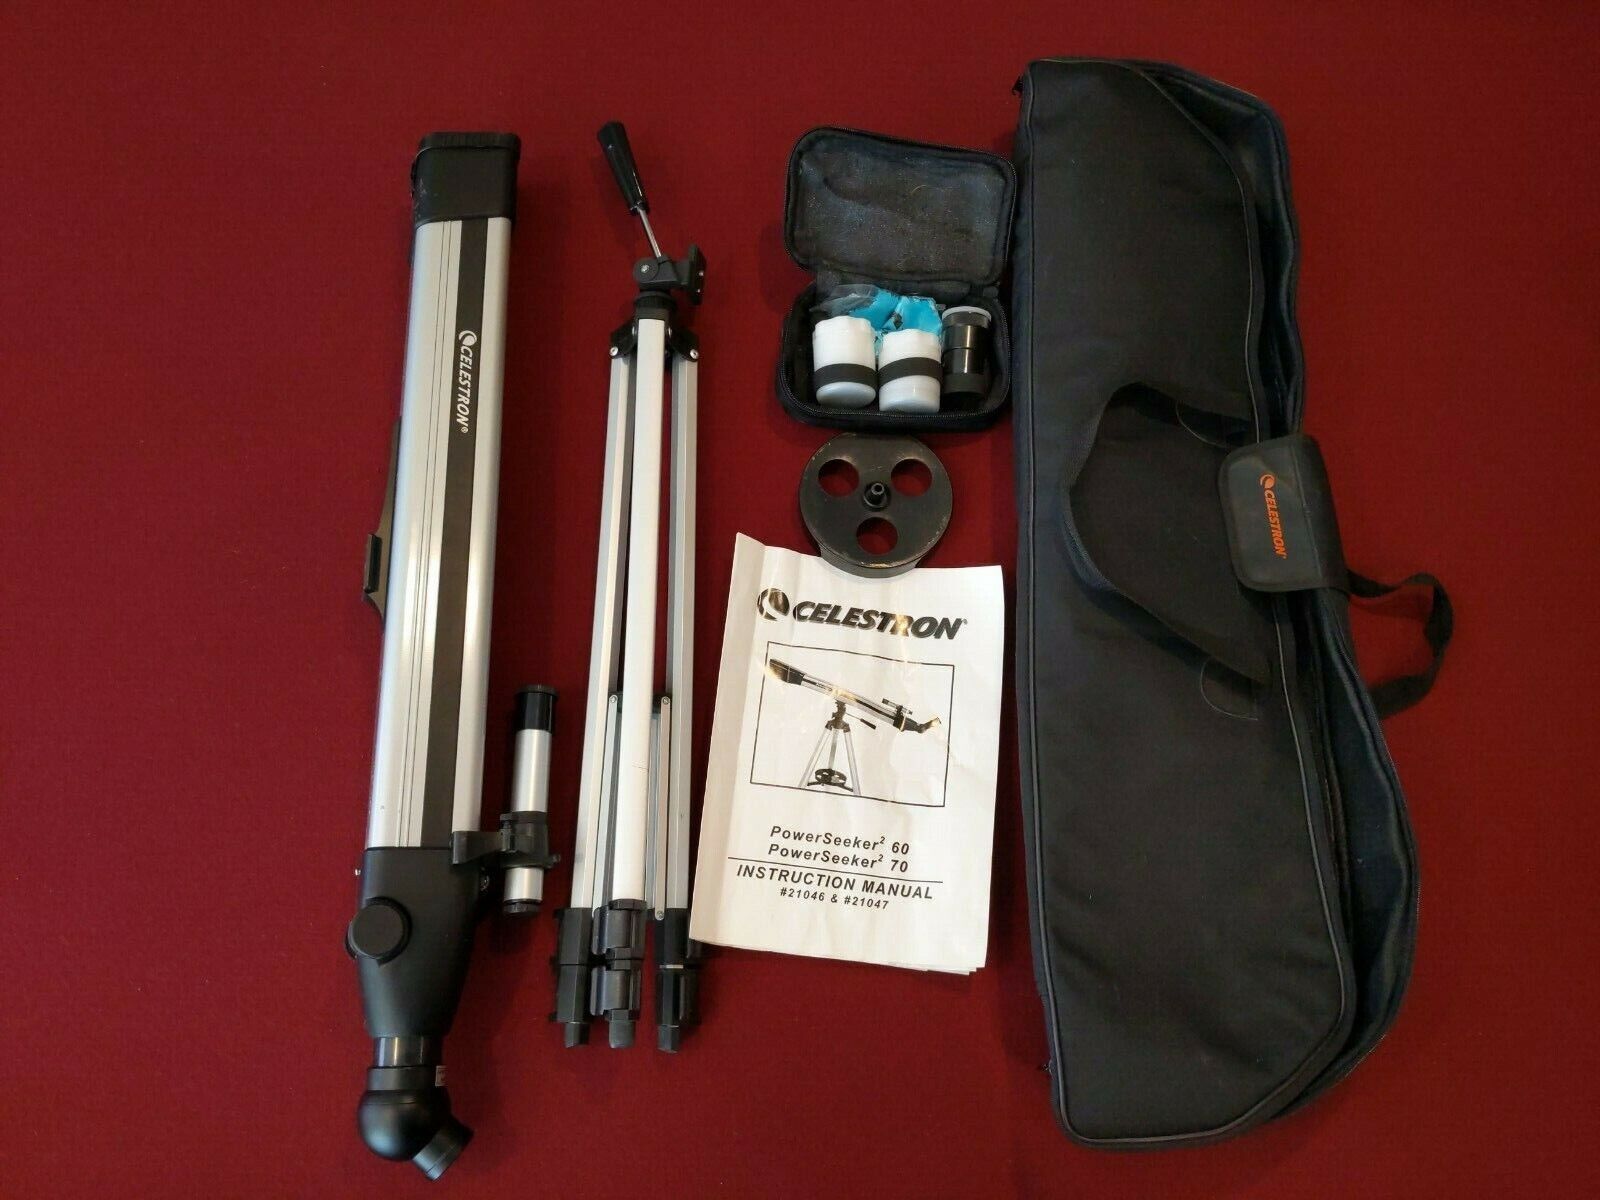 Celestron Power Seeker Telescope With Adjustable Tripod and Carrying Case